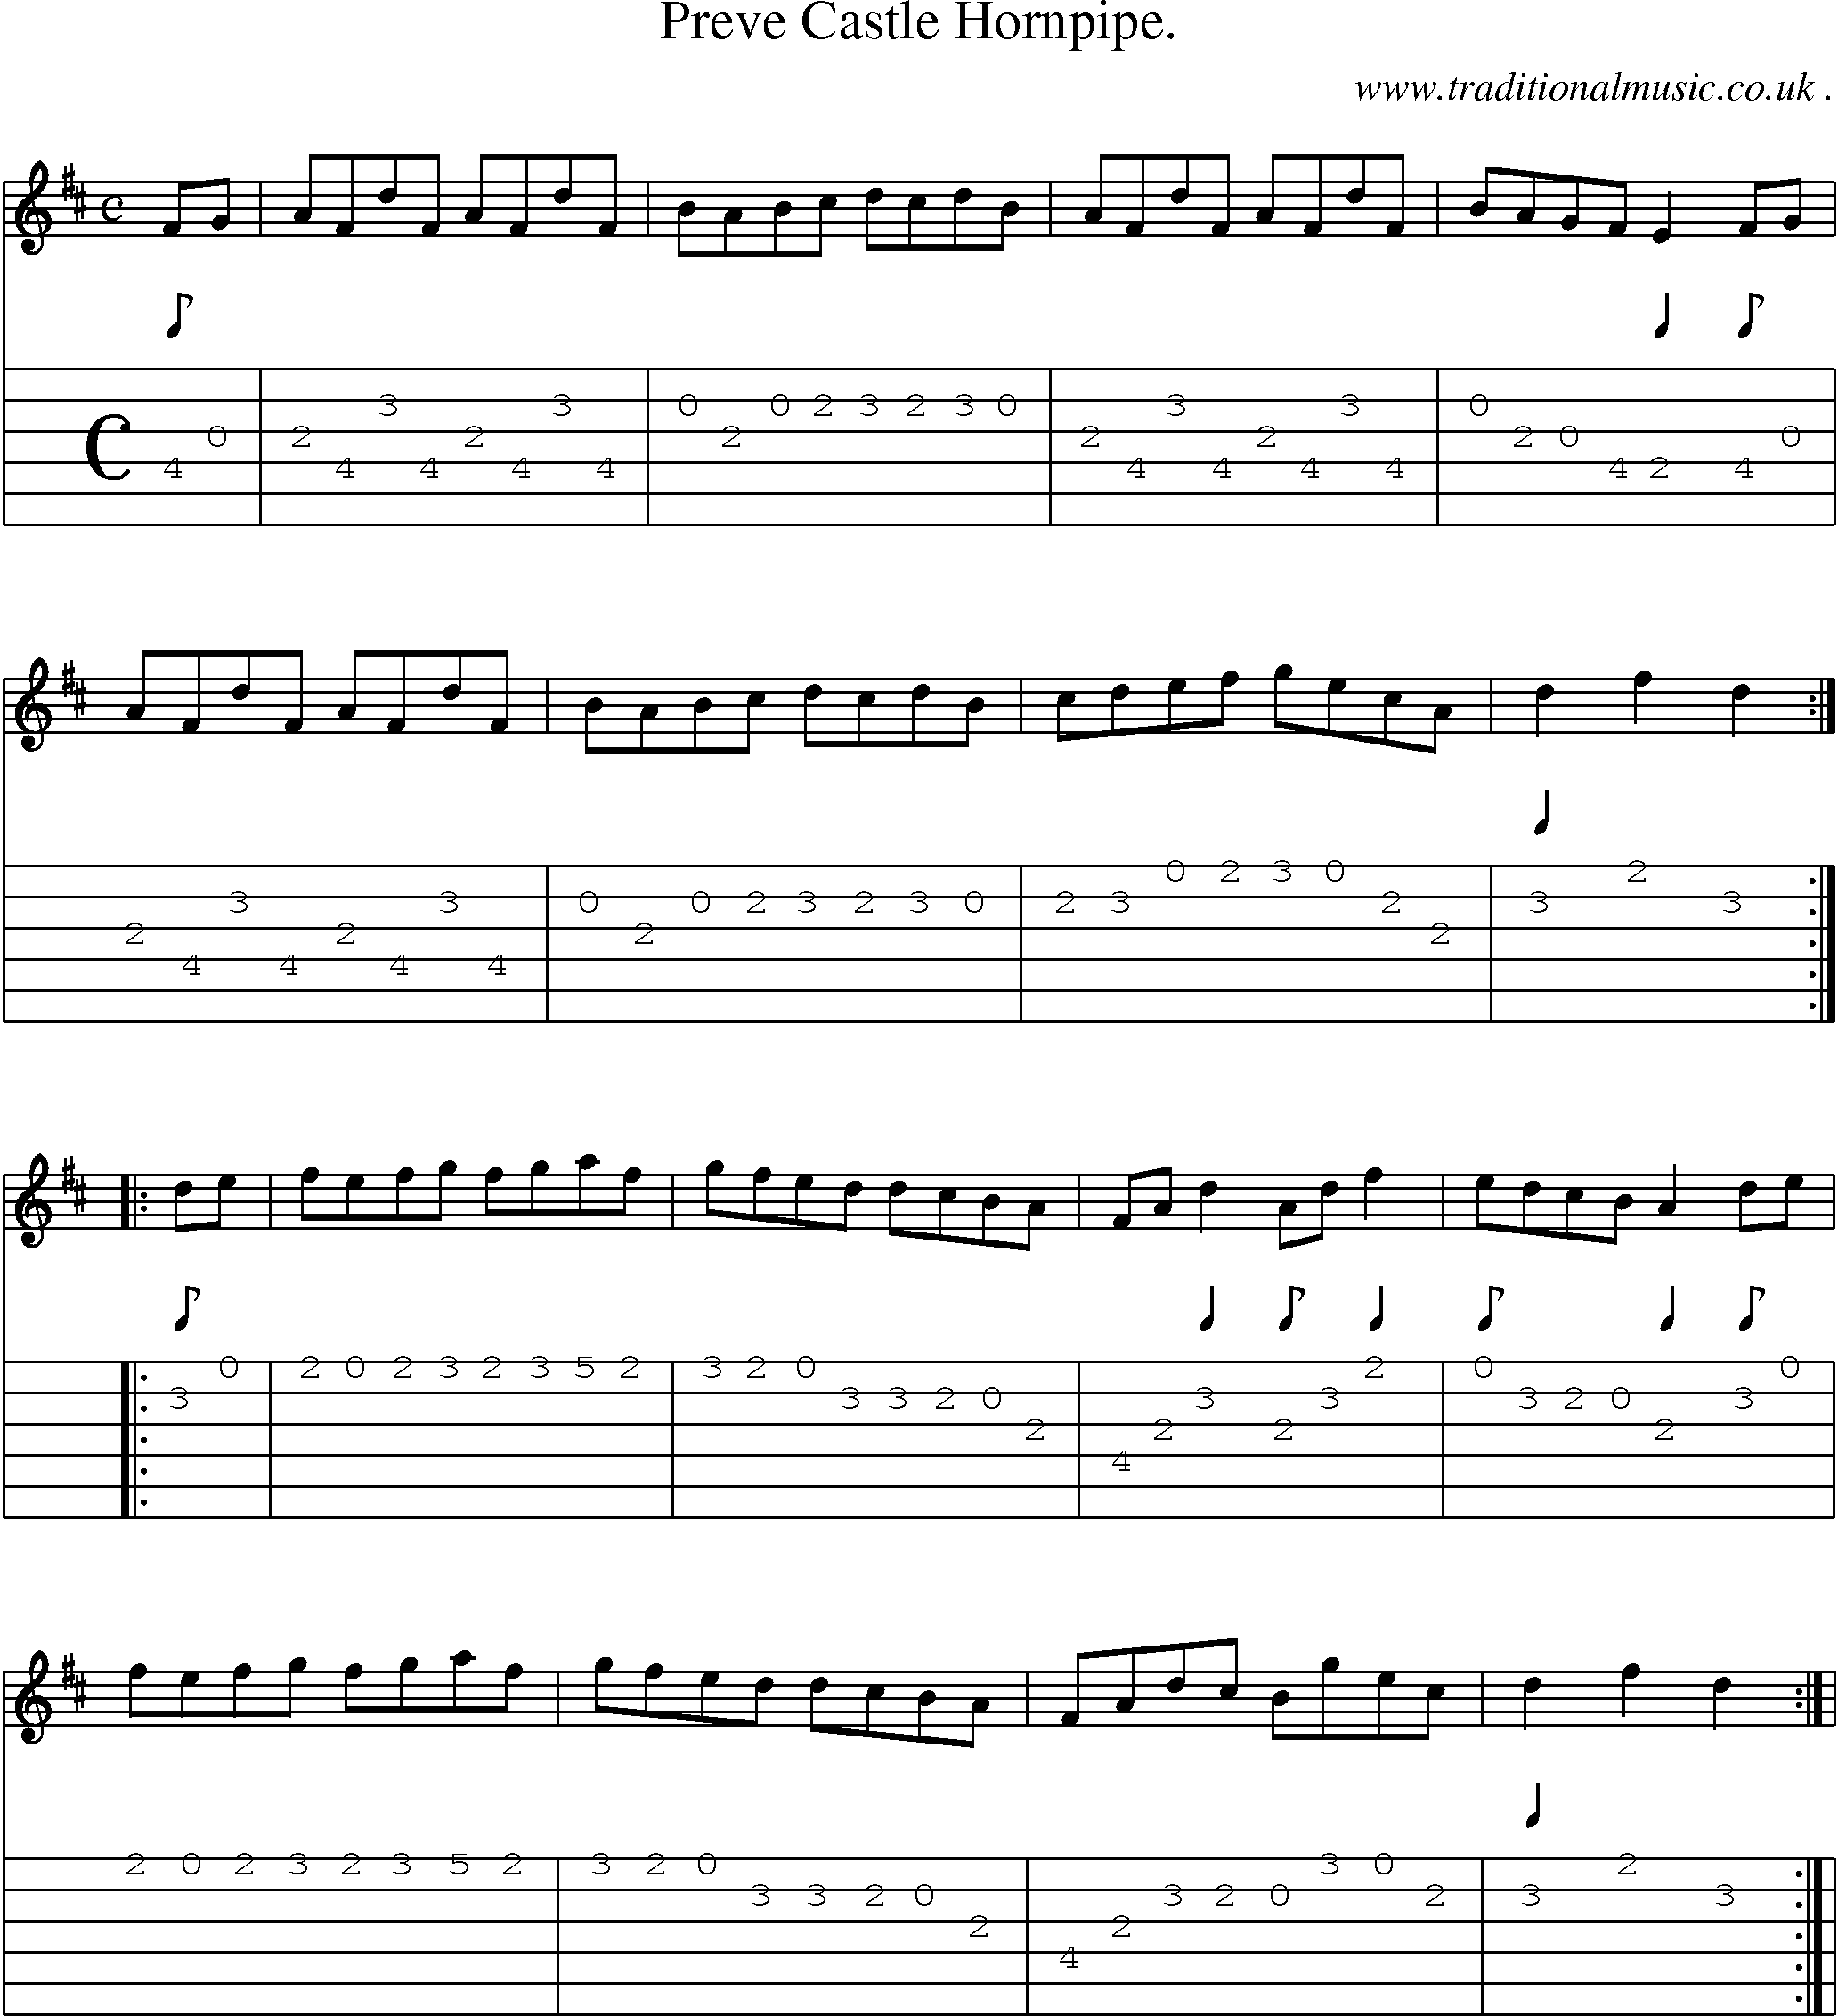 Sheet-Music and Guitar Tabs for Preve Castle Hornpipe